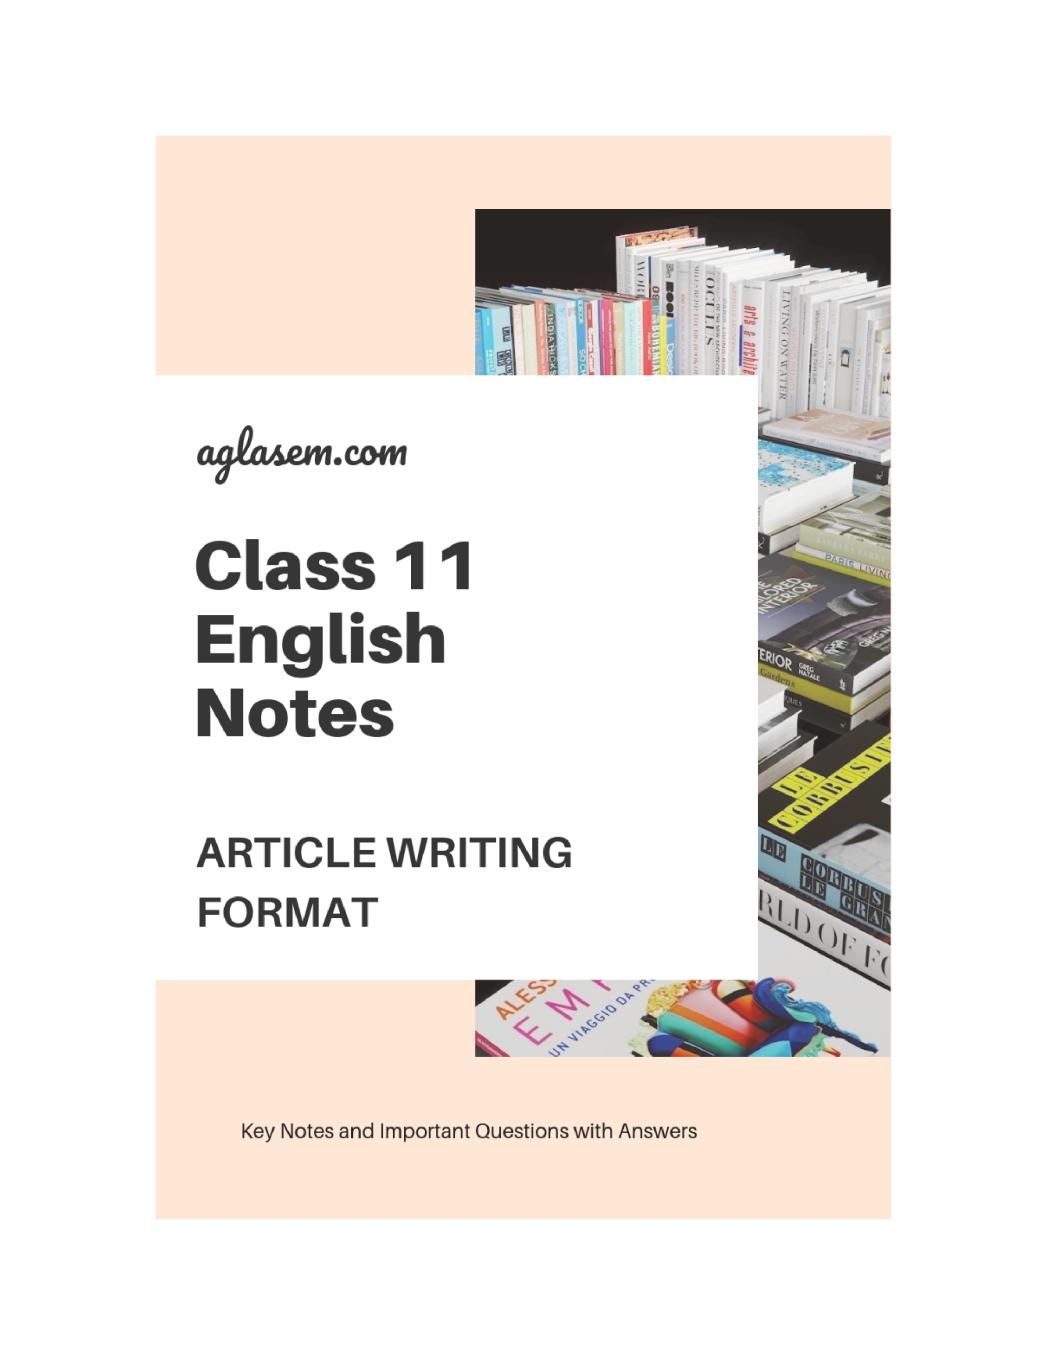 Class 11 English Article Writing Format - Page 1